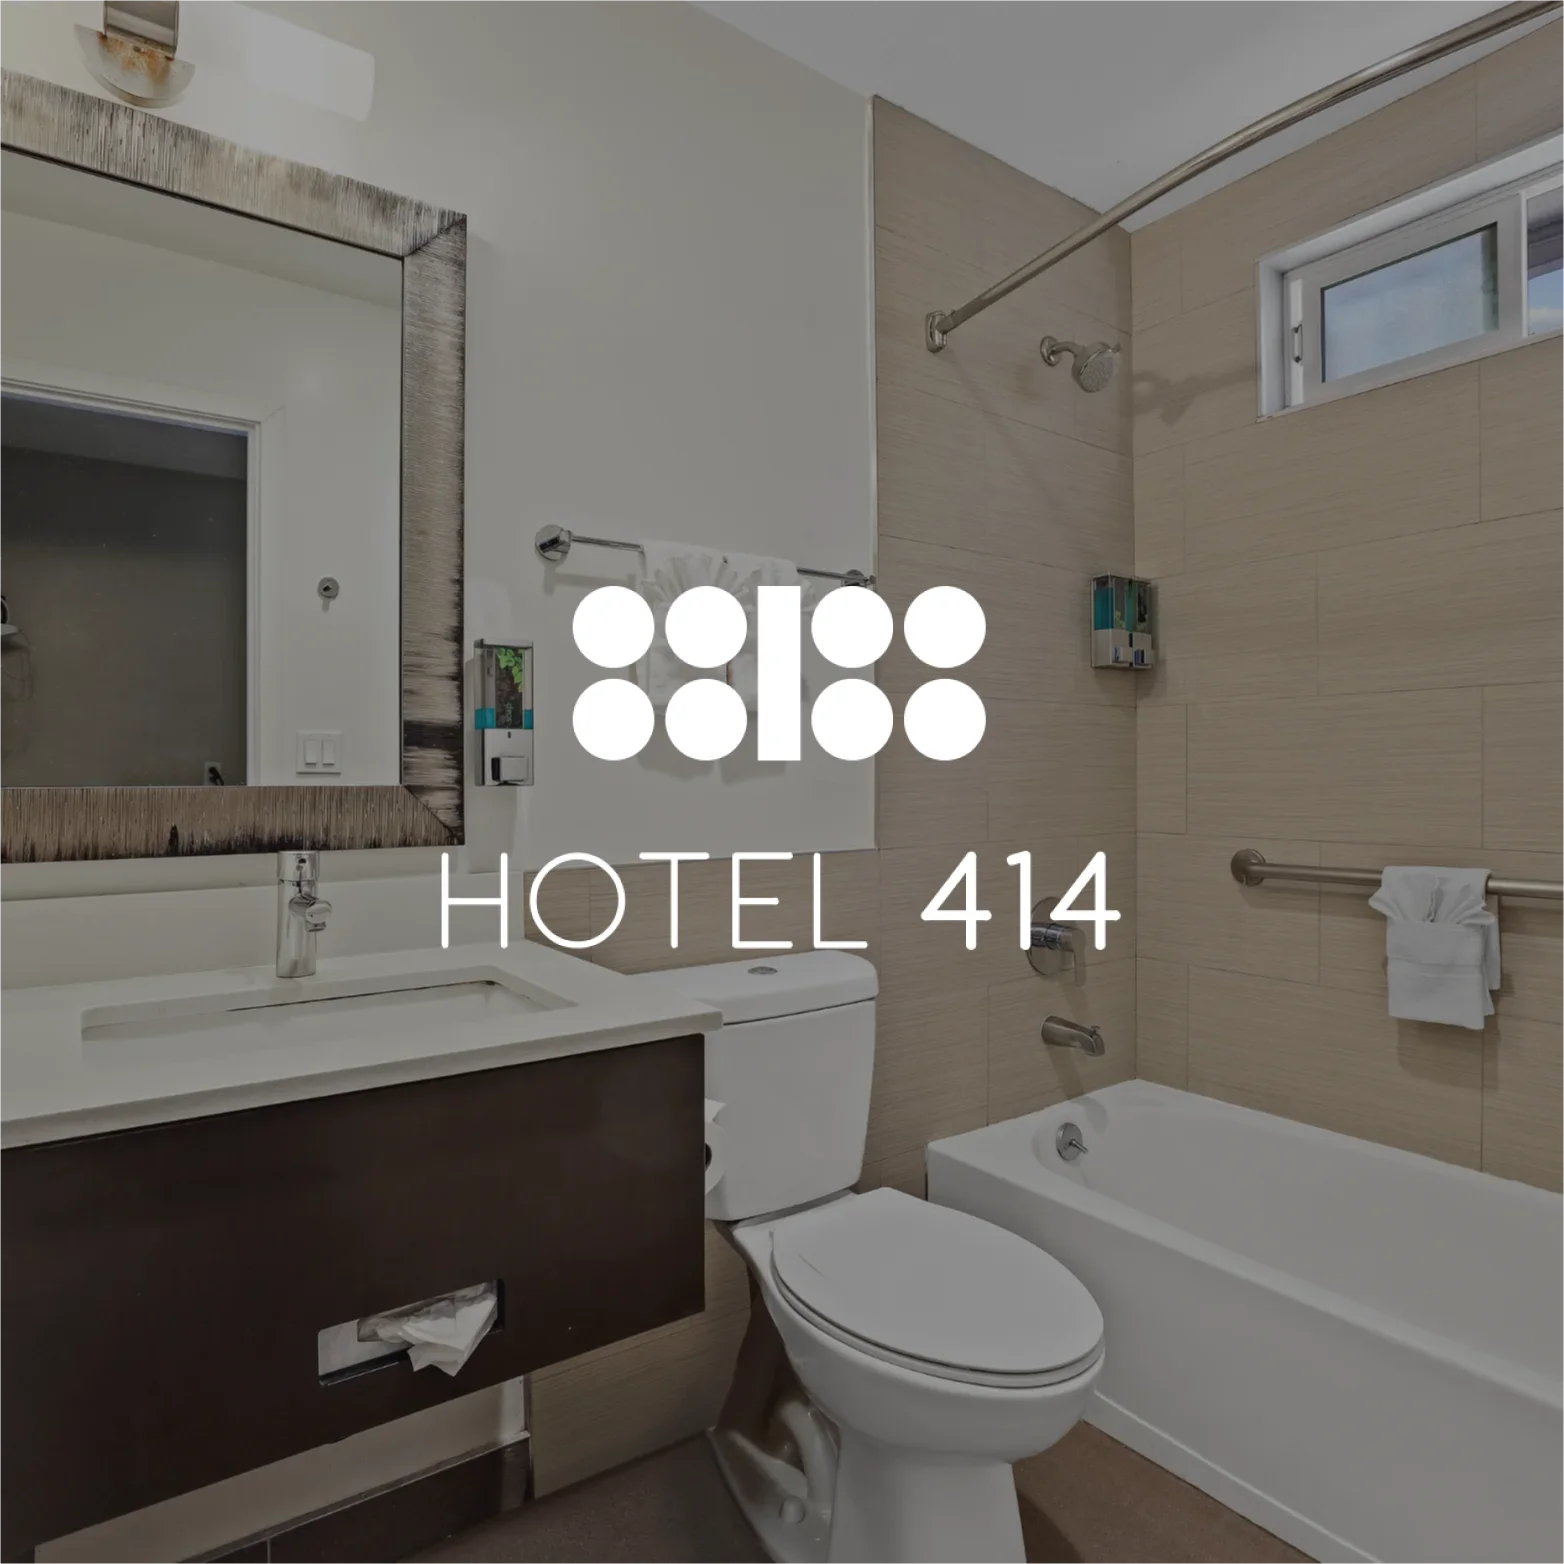 Hotel 414: Tag Client